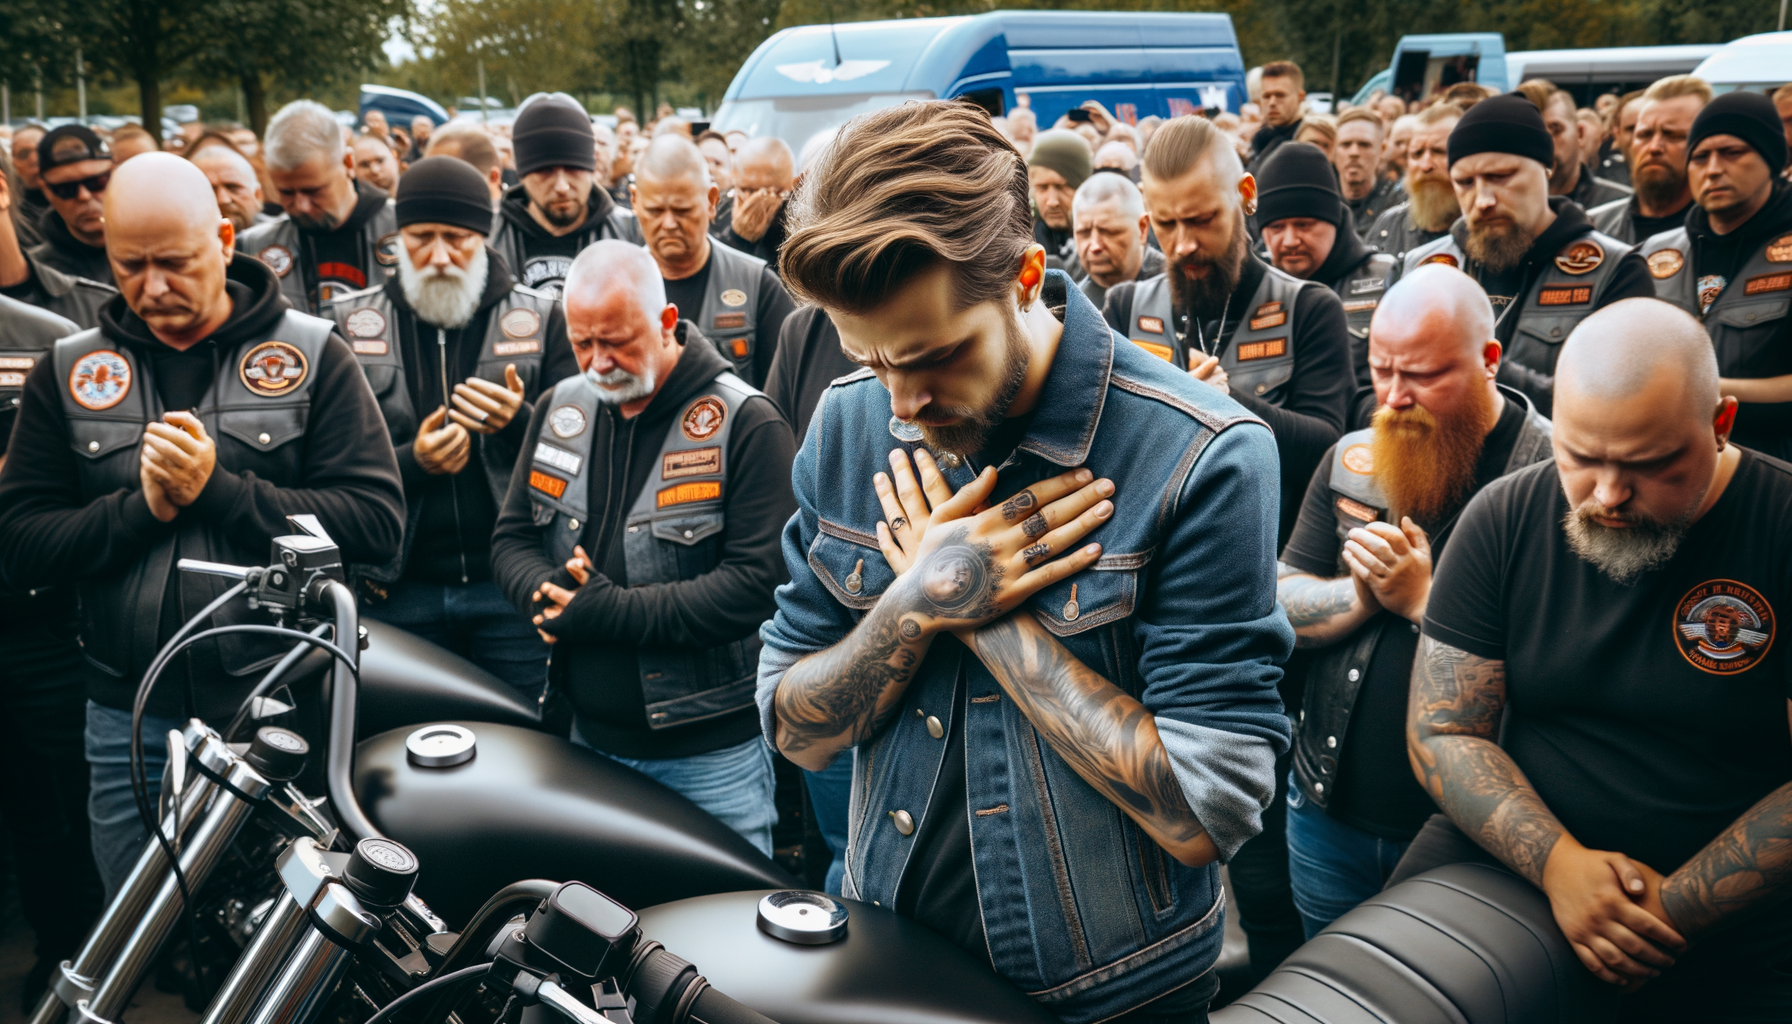 grieving the loss of loved ones: funerals held for bikers in a touching ceremony